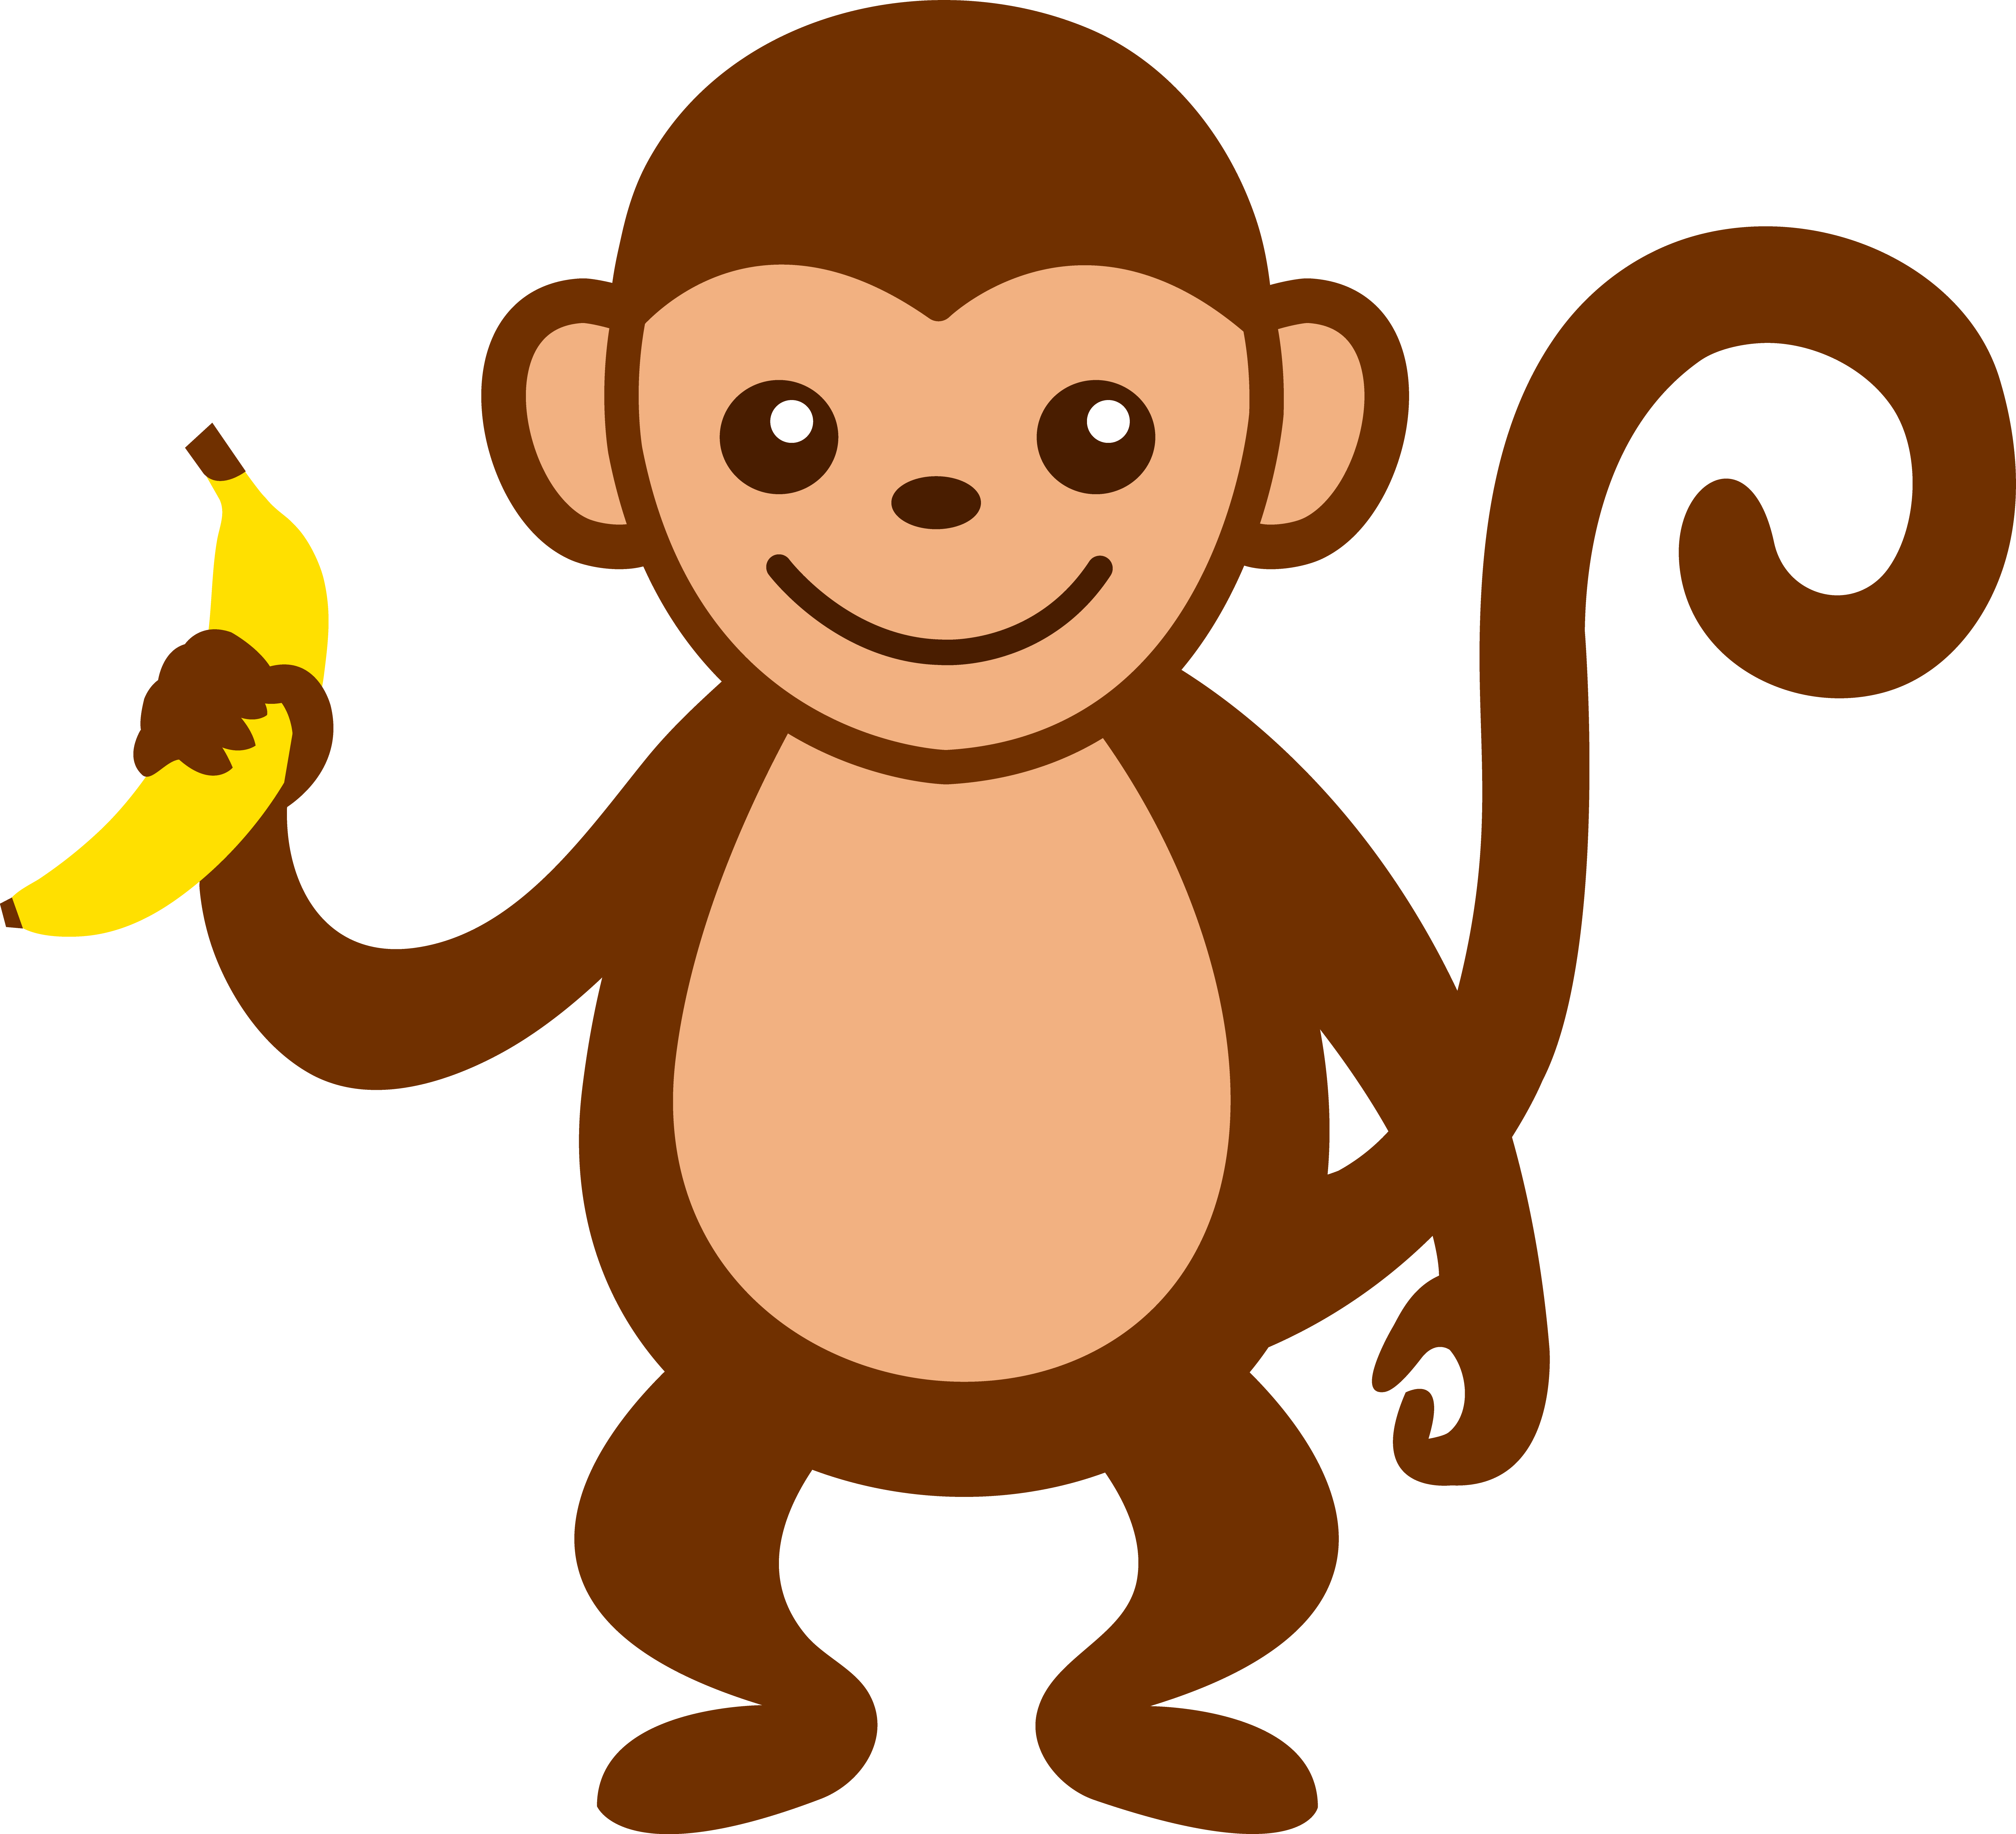 Cute Cartoon Monkey Pictures - Cliparts.co